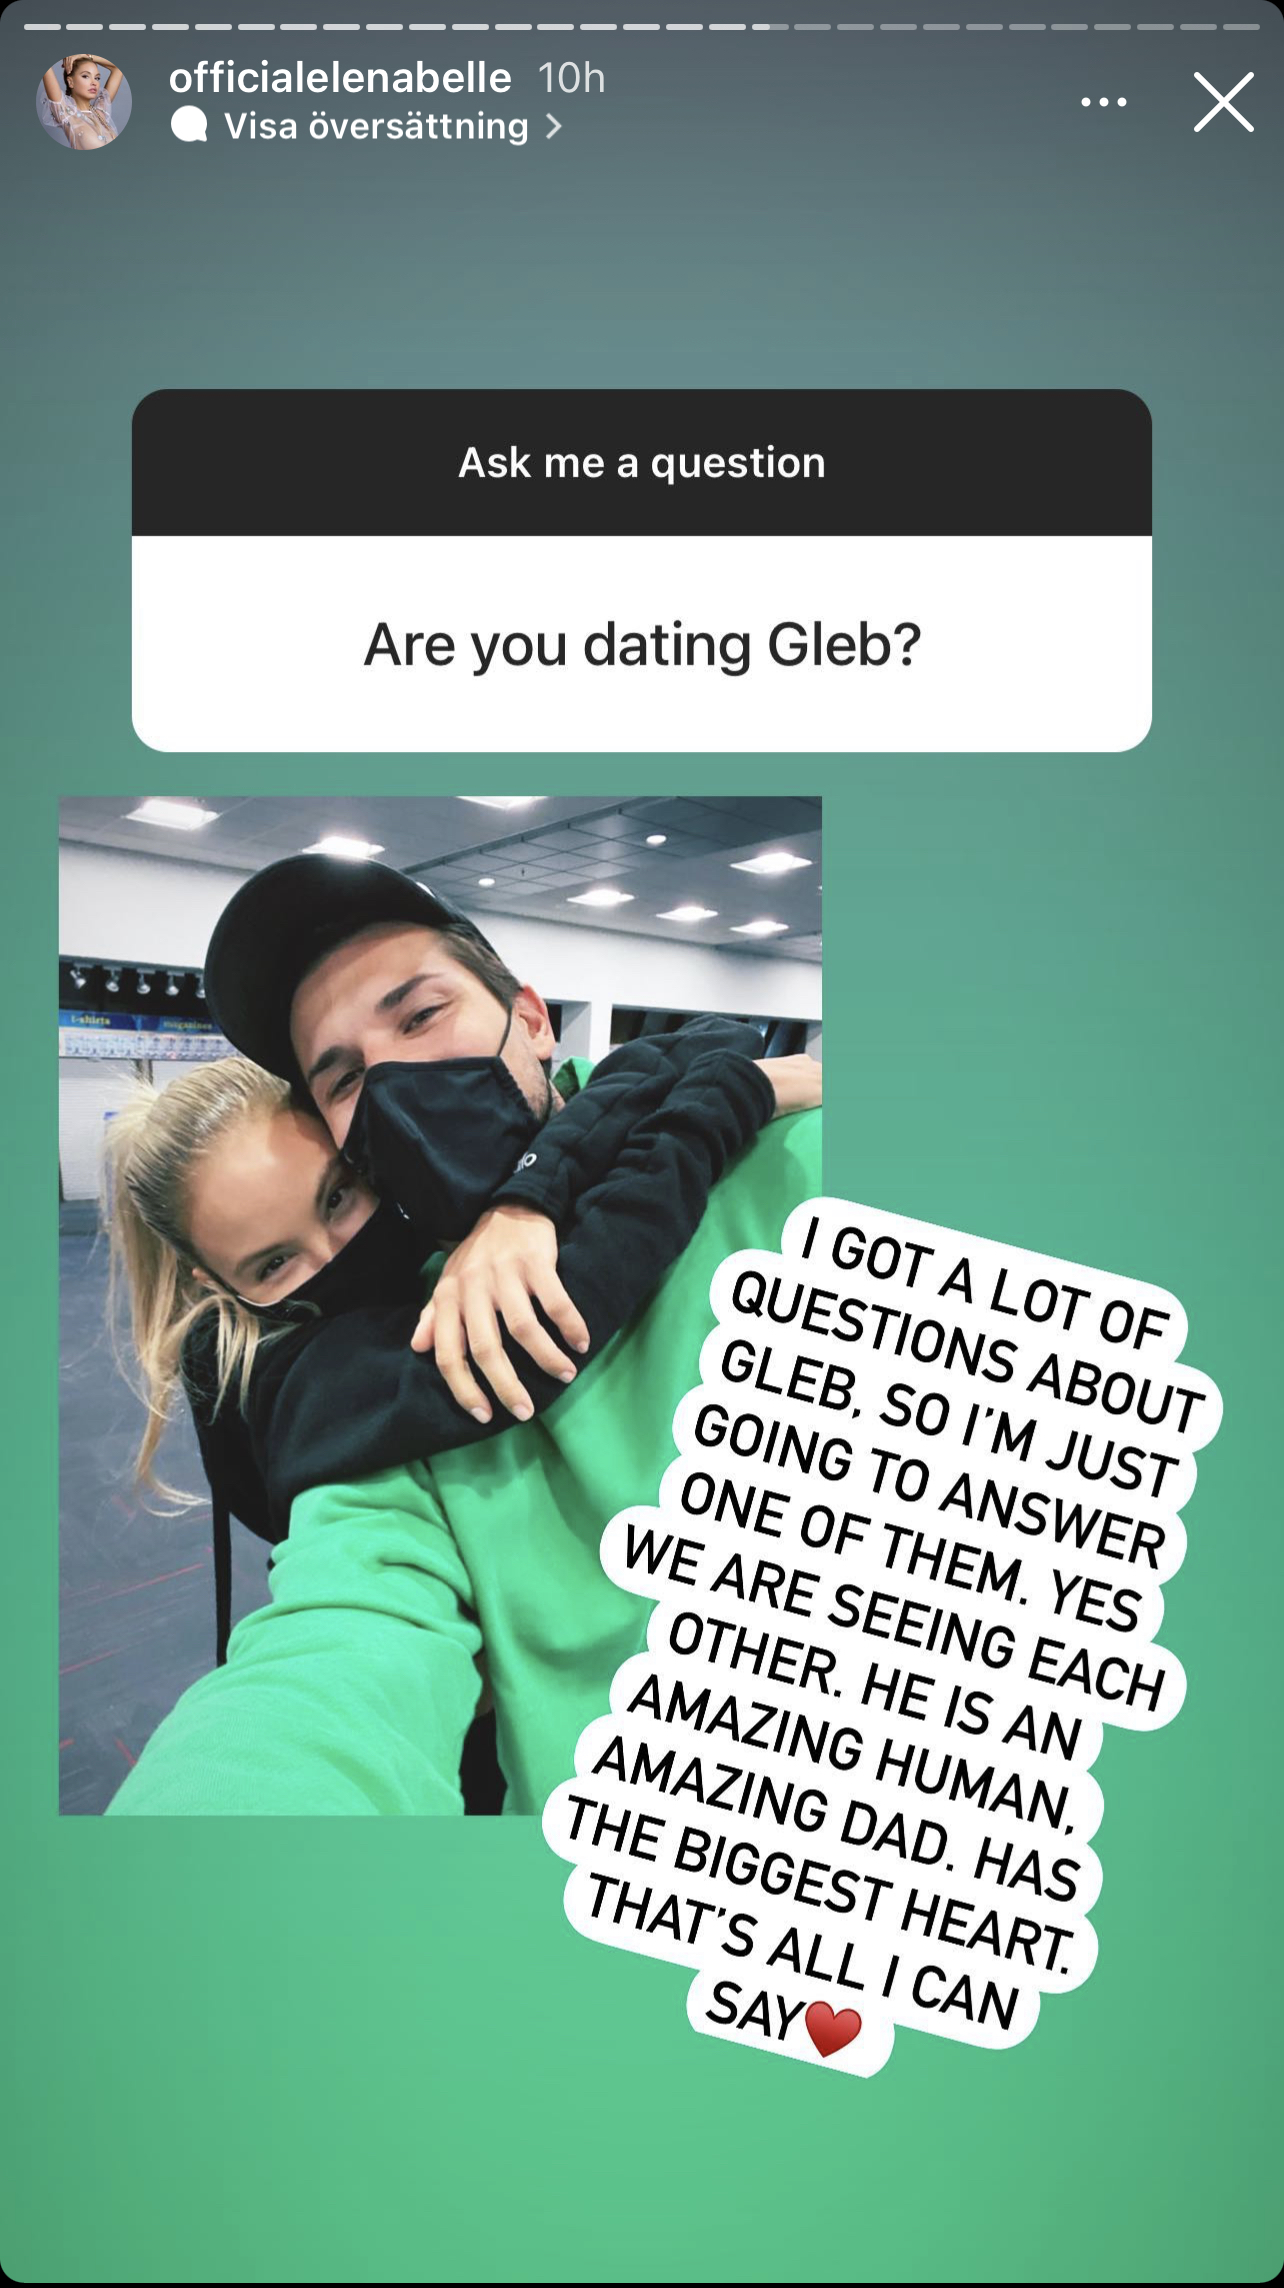 Fråga: Are you dating Gleb? Svar: I got a lot of questions about Gleb so I am just going to answer one of them. Yes, we are seeing each other. He is an amazing human, amazing dad. He has the biggest heart. That’s all I can say. ♥️